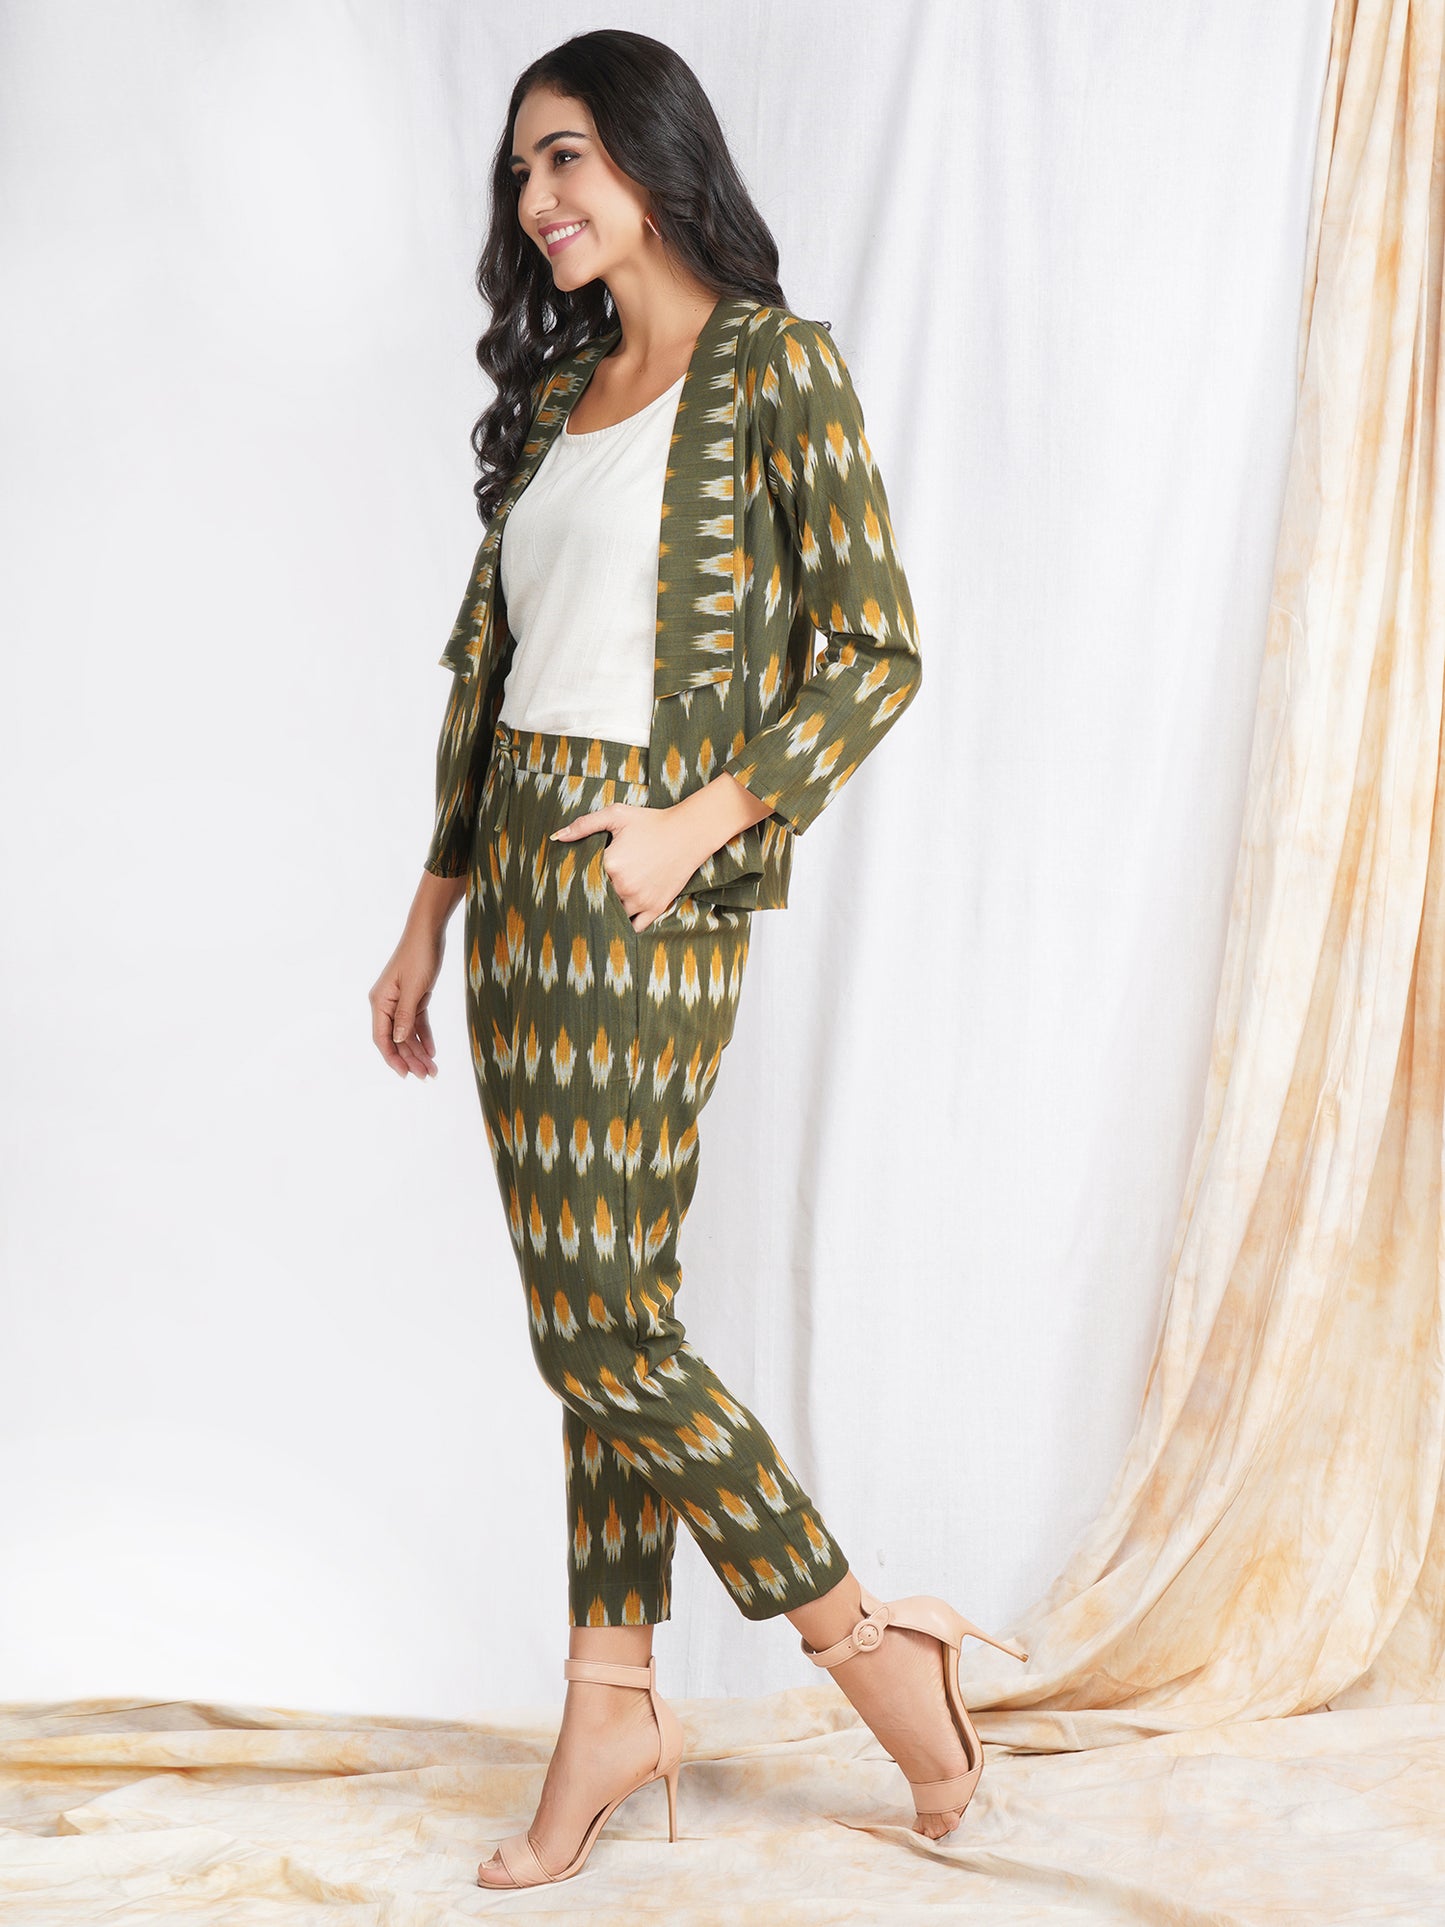 Co-ord Setfor Women Ikat Blazer with pants for ladies